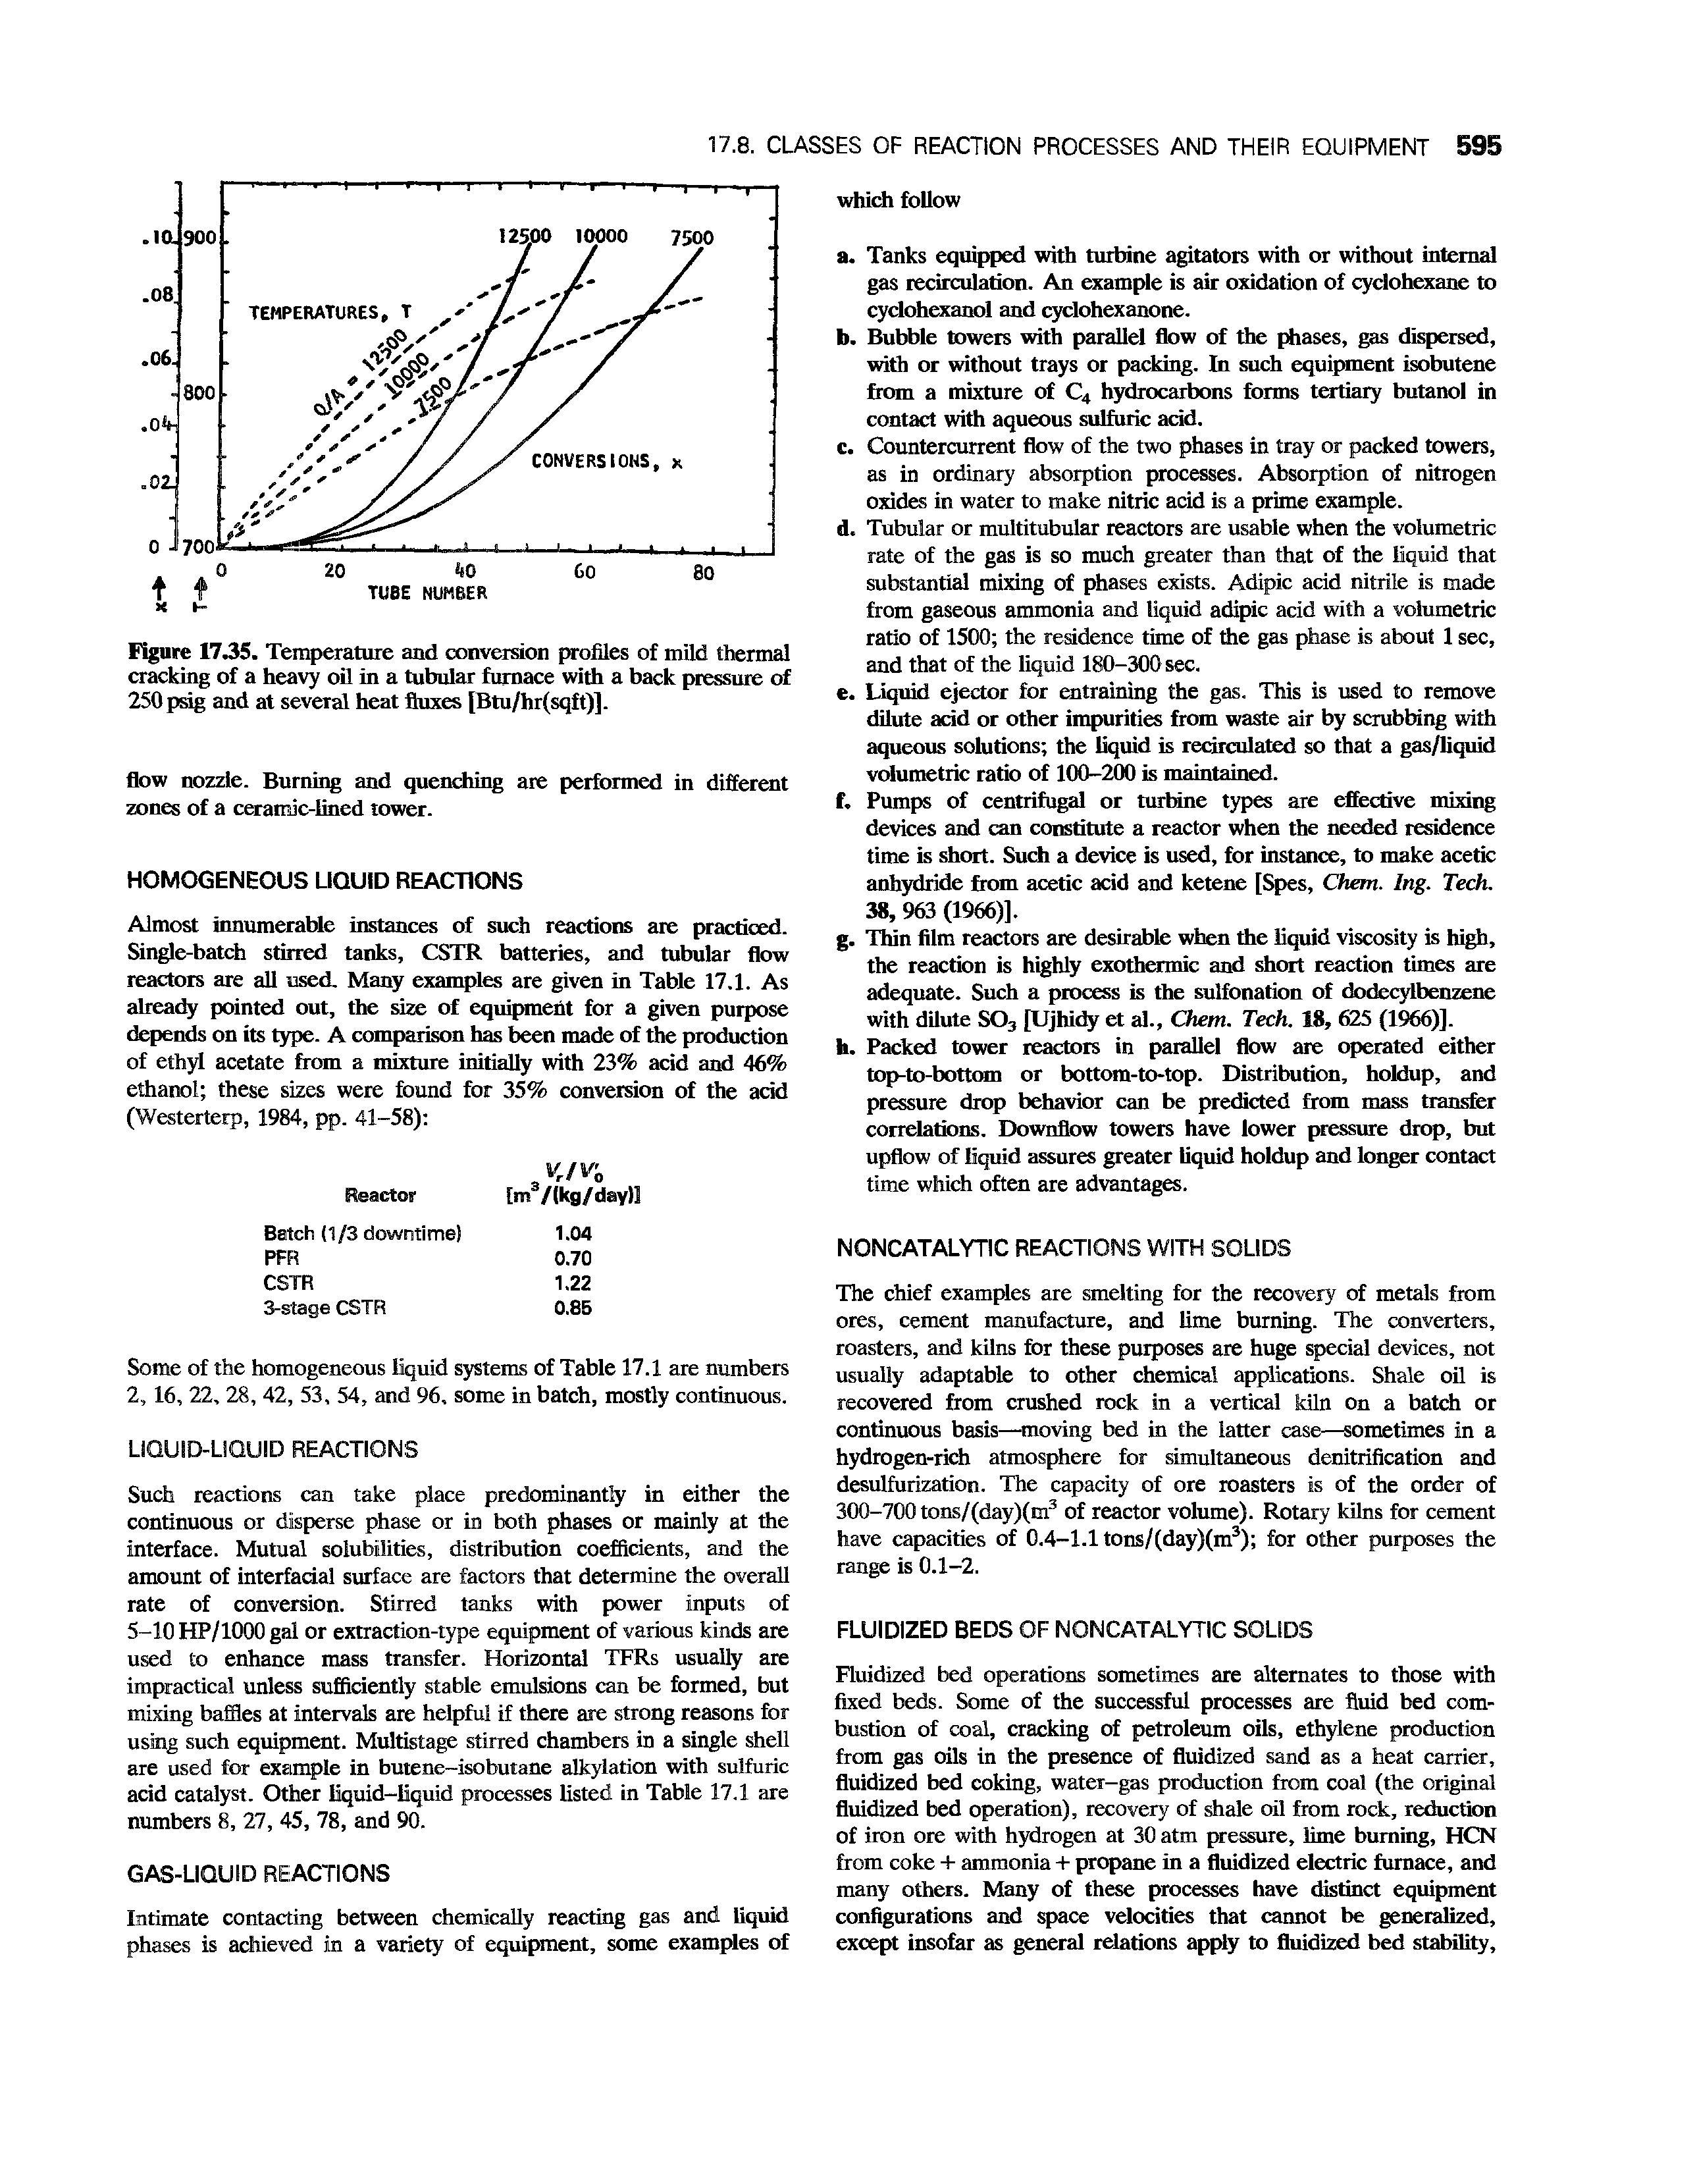 Figure 17.35. Temperature and conversion profiles of mild thermal cracking of a heavy oil in a tubular furnace with a back pressure of 250 pag and at several heat fluxes [Btu/hr(sqft)].